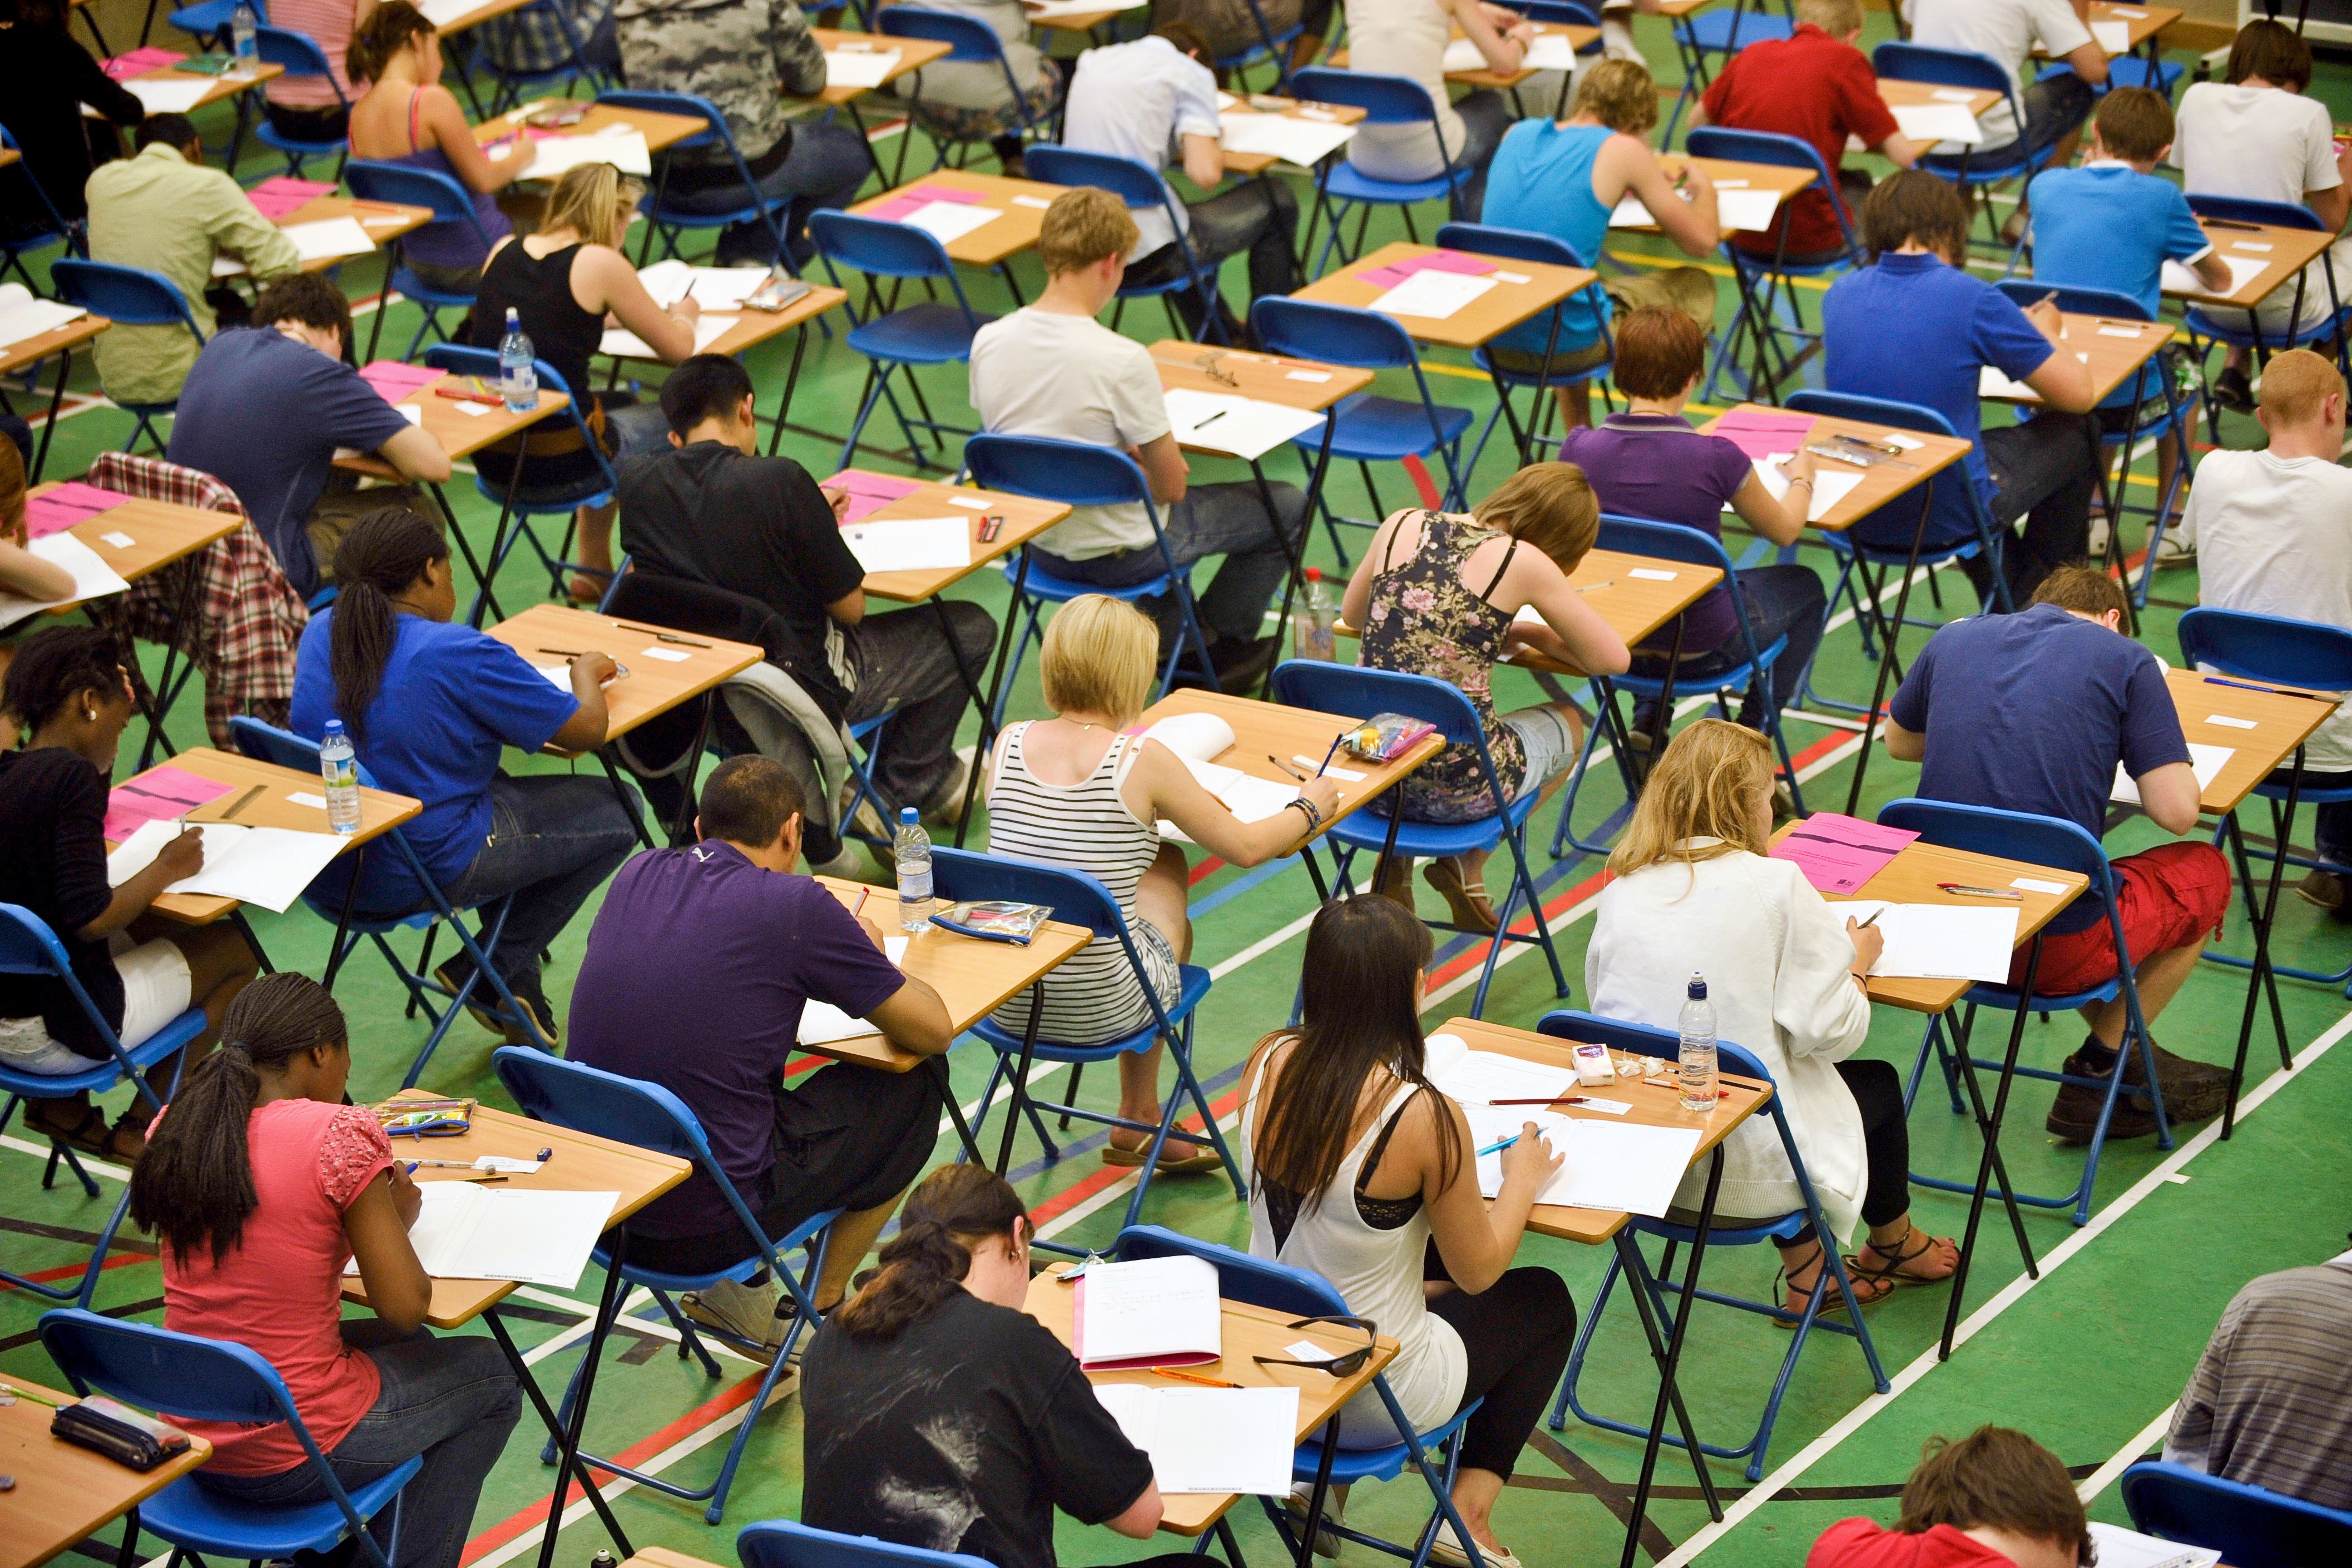 GCSE and A-level pupils to be awarded fewer top grades in 2022, says Ofqual, Education